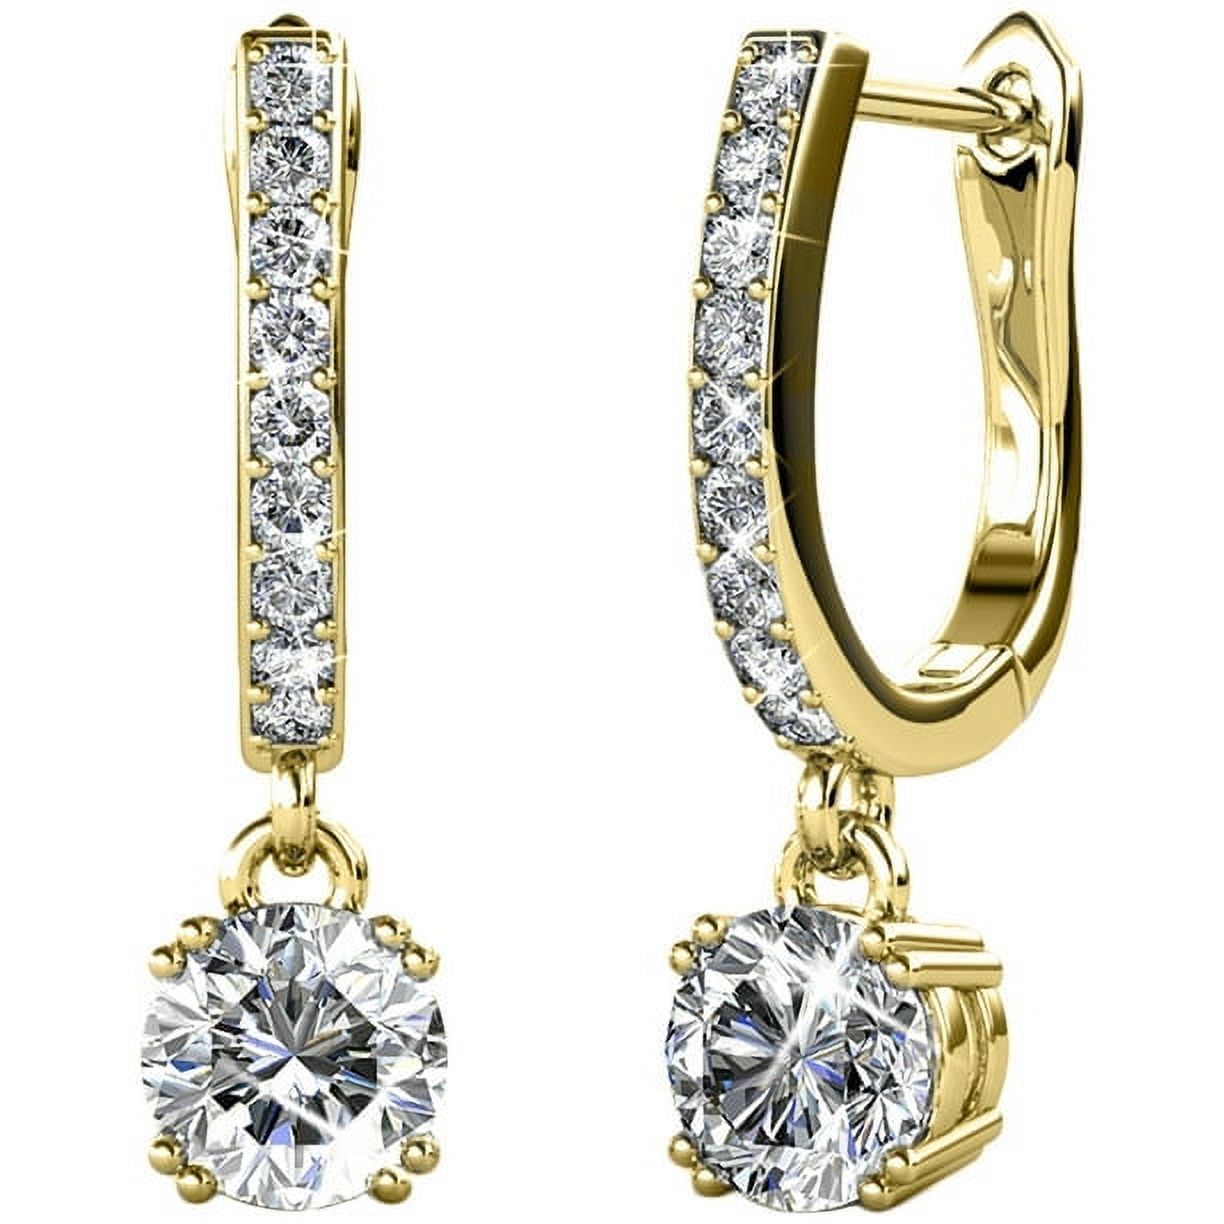 Cate & Chloe McKenzie 18k Yellow Gold Plated Drop Dangle Crystal Earrings | Gold Jewelry for Women, Gift for Her - image 1 of 10